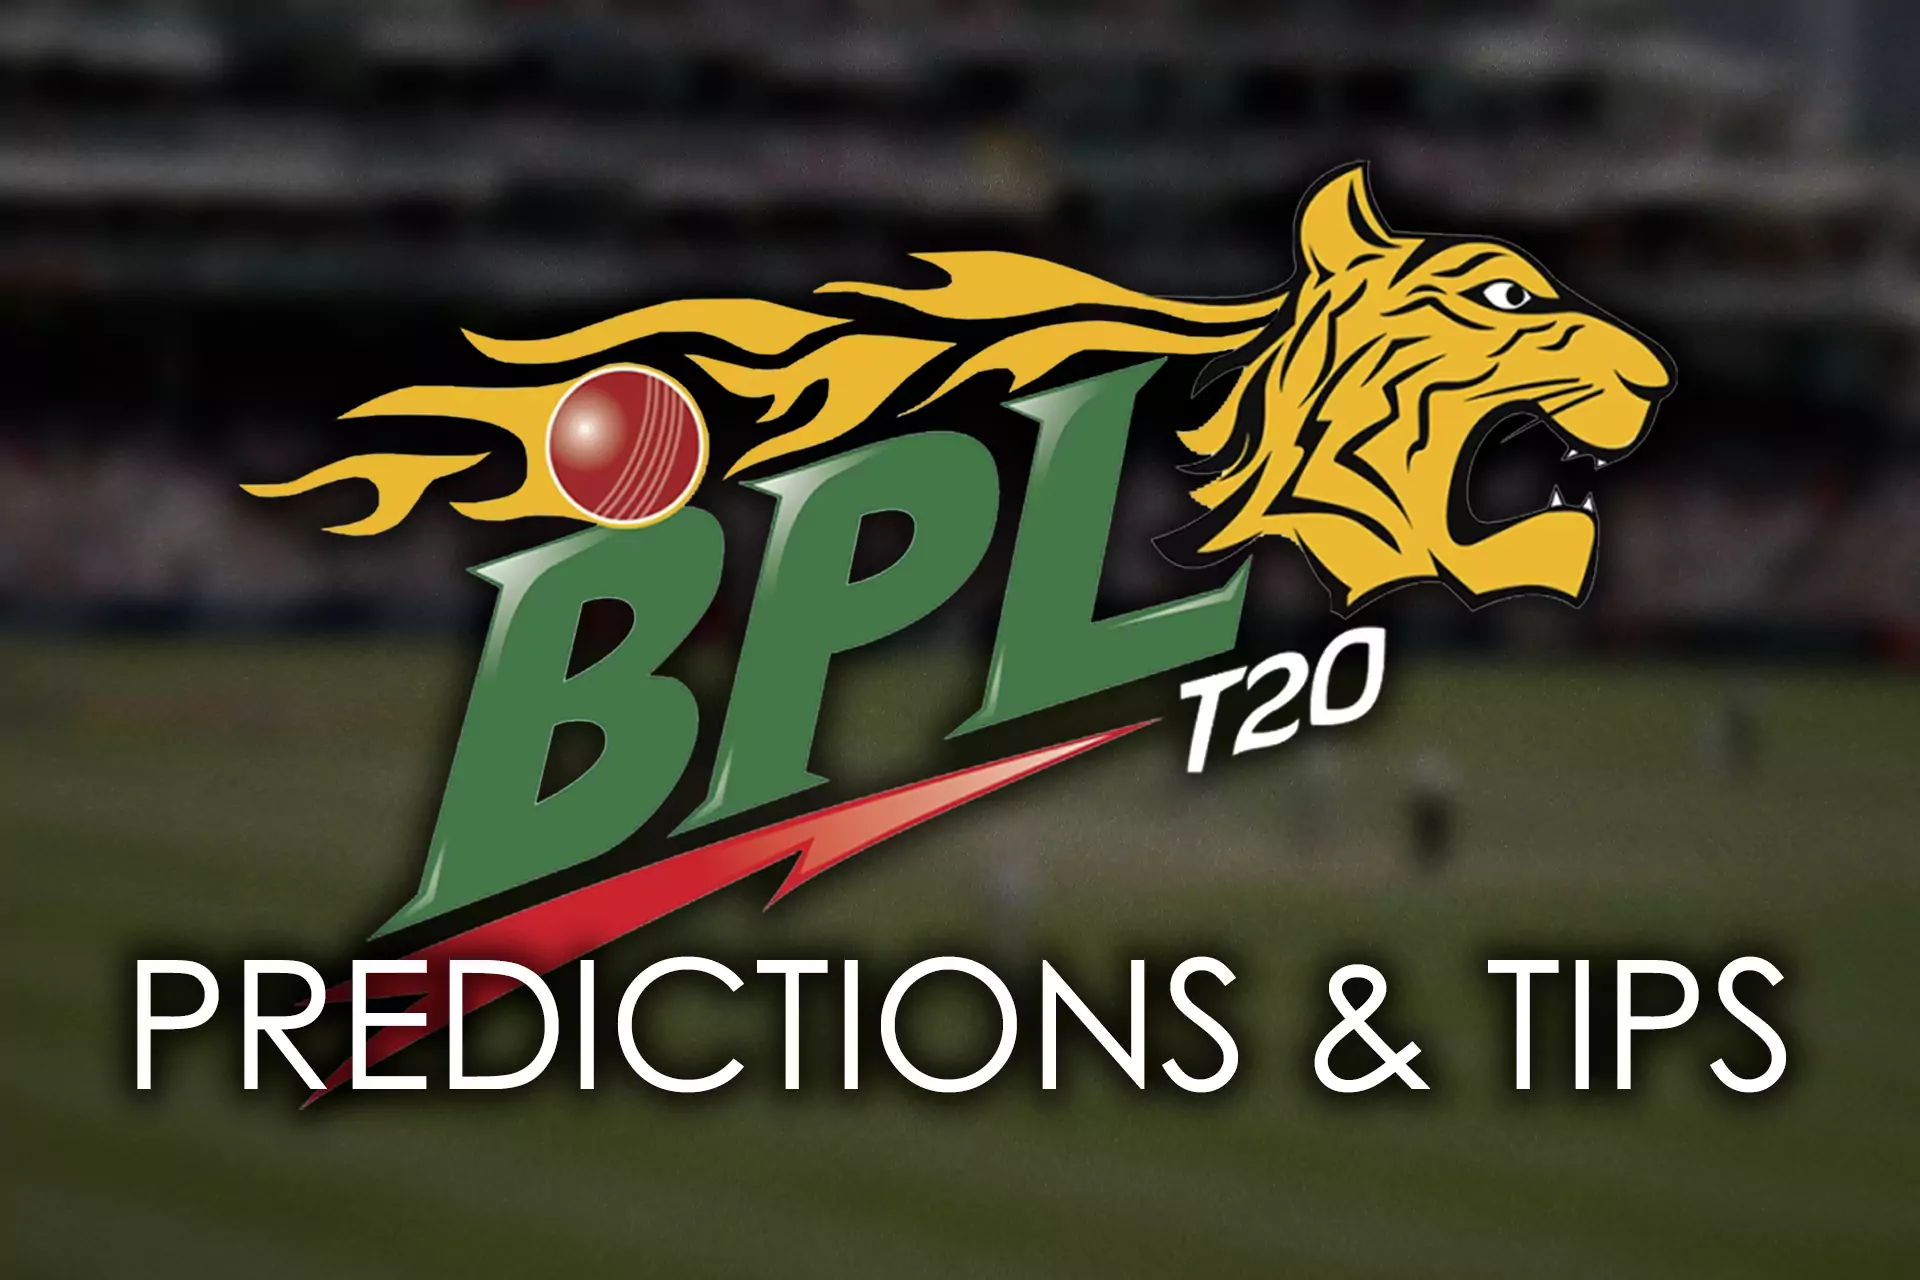 Cricket fans who are going to bet on the BPL should analyze the events and possibilities of the teams.